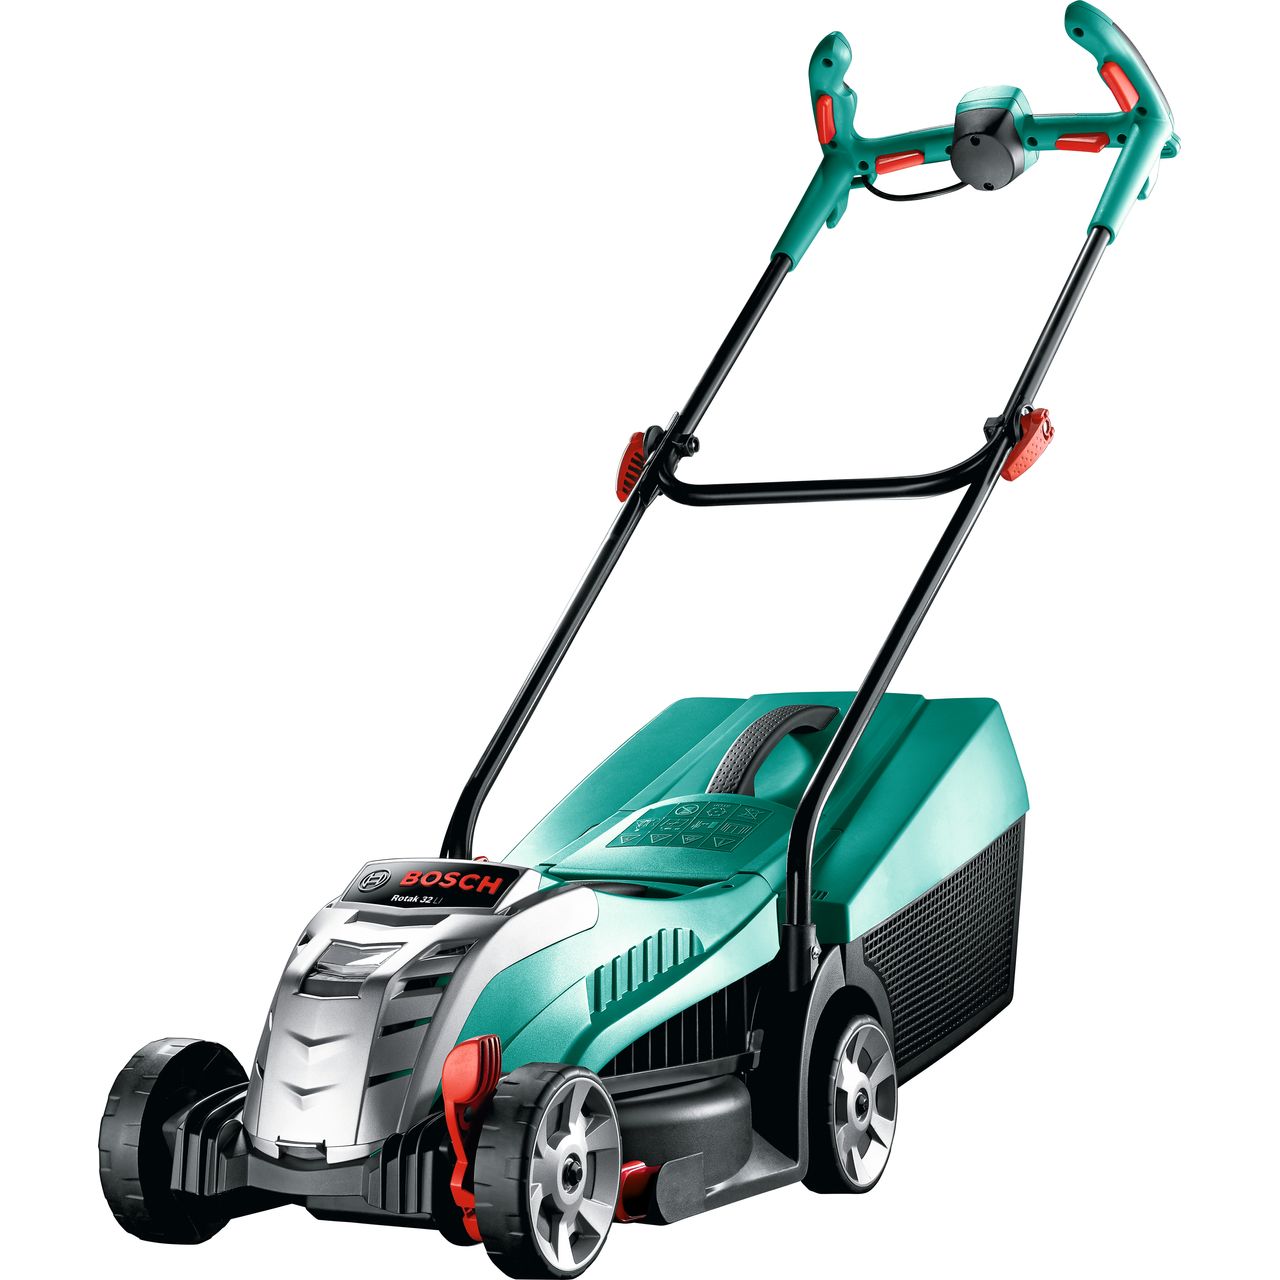 Bosch Rotak 32 Cordless 36 Volts Cordless Lawnmower Review